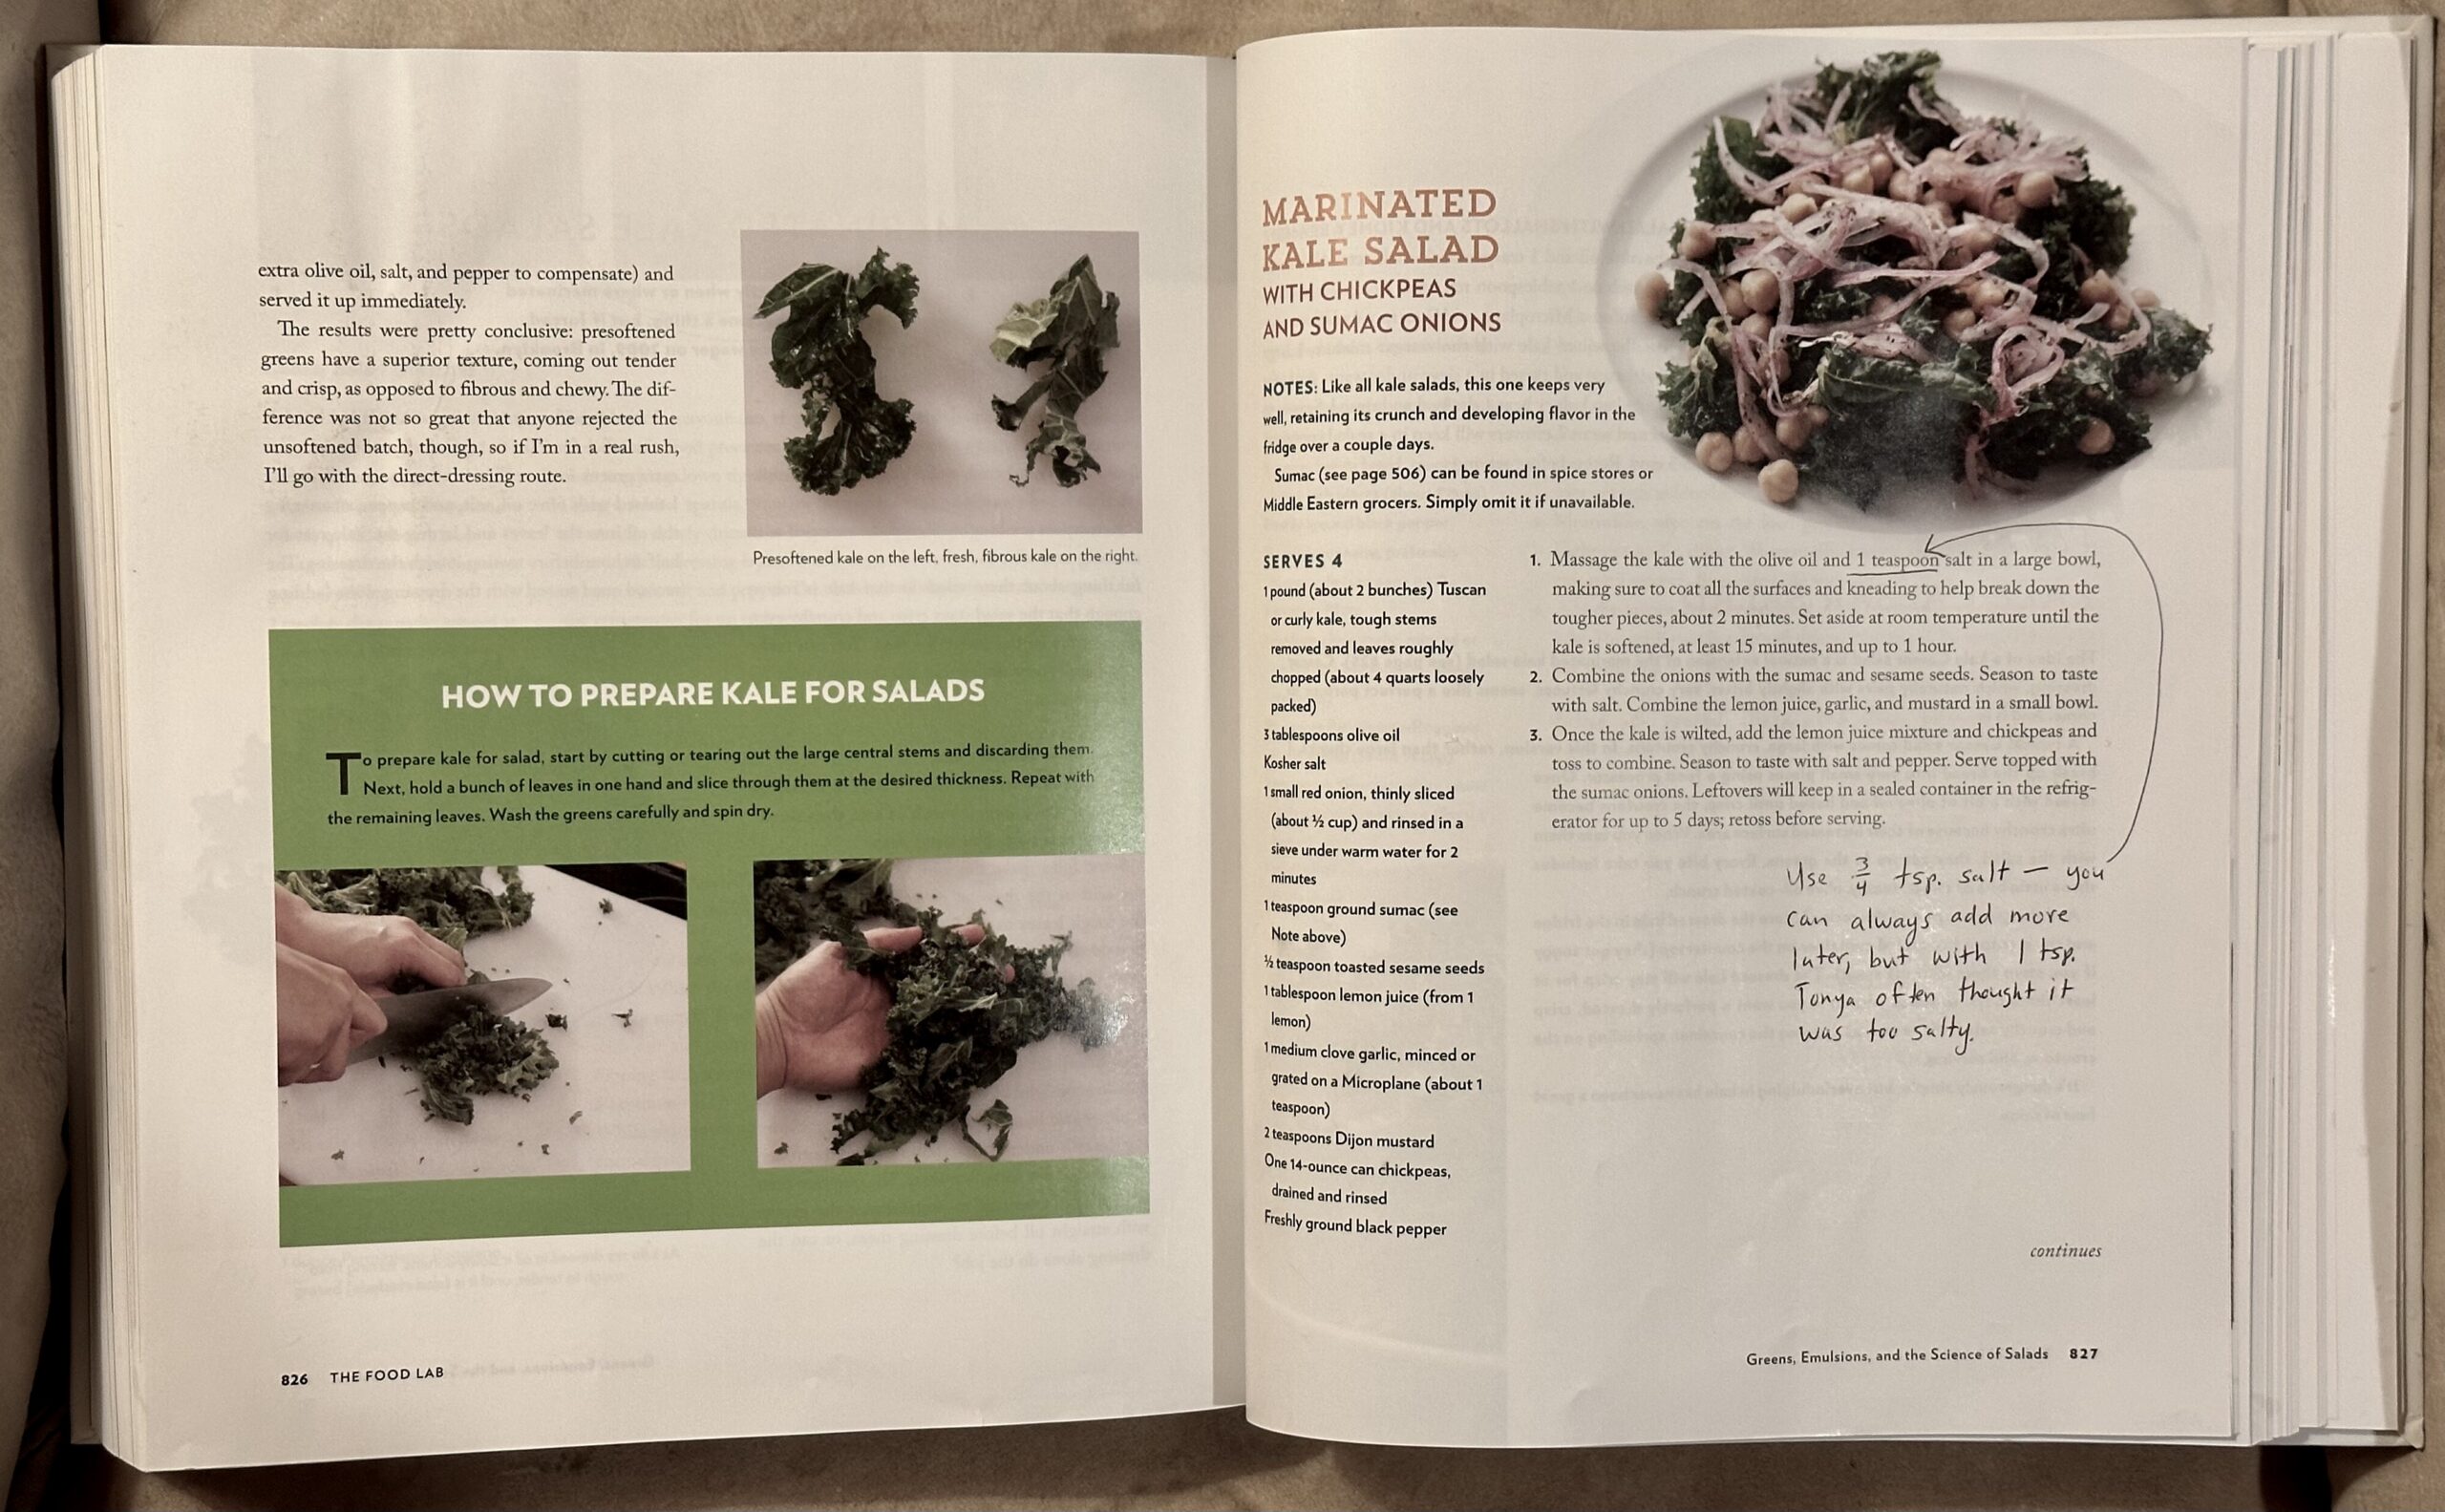 Marinated Kale Salad recipe from The Food Lab